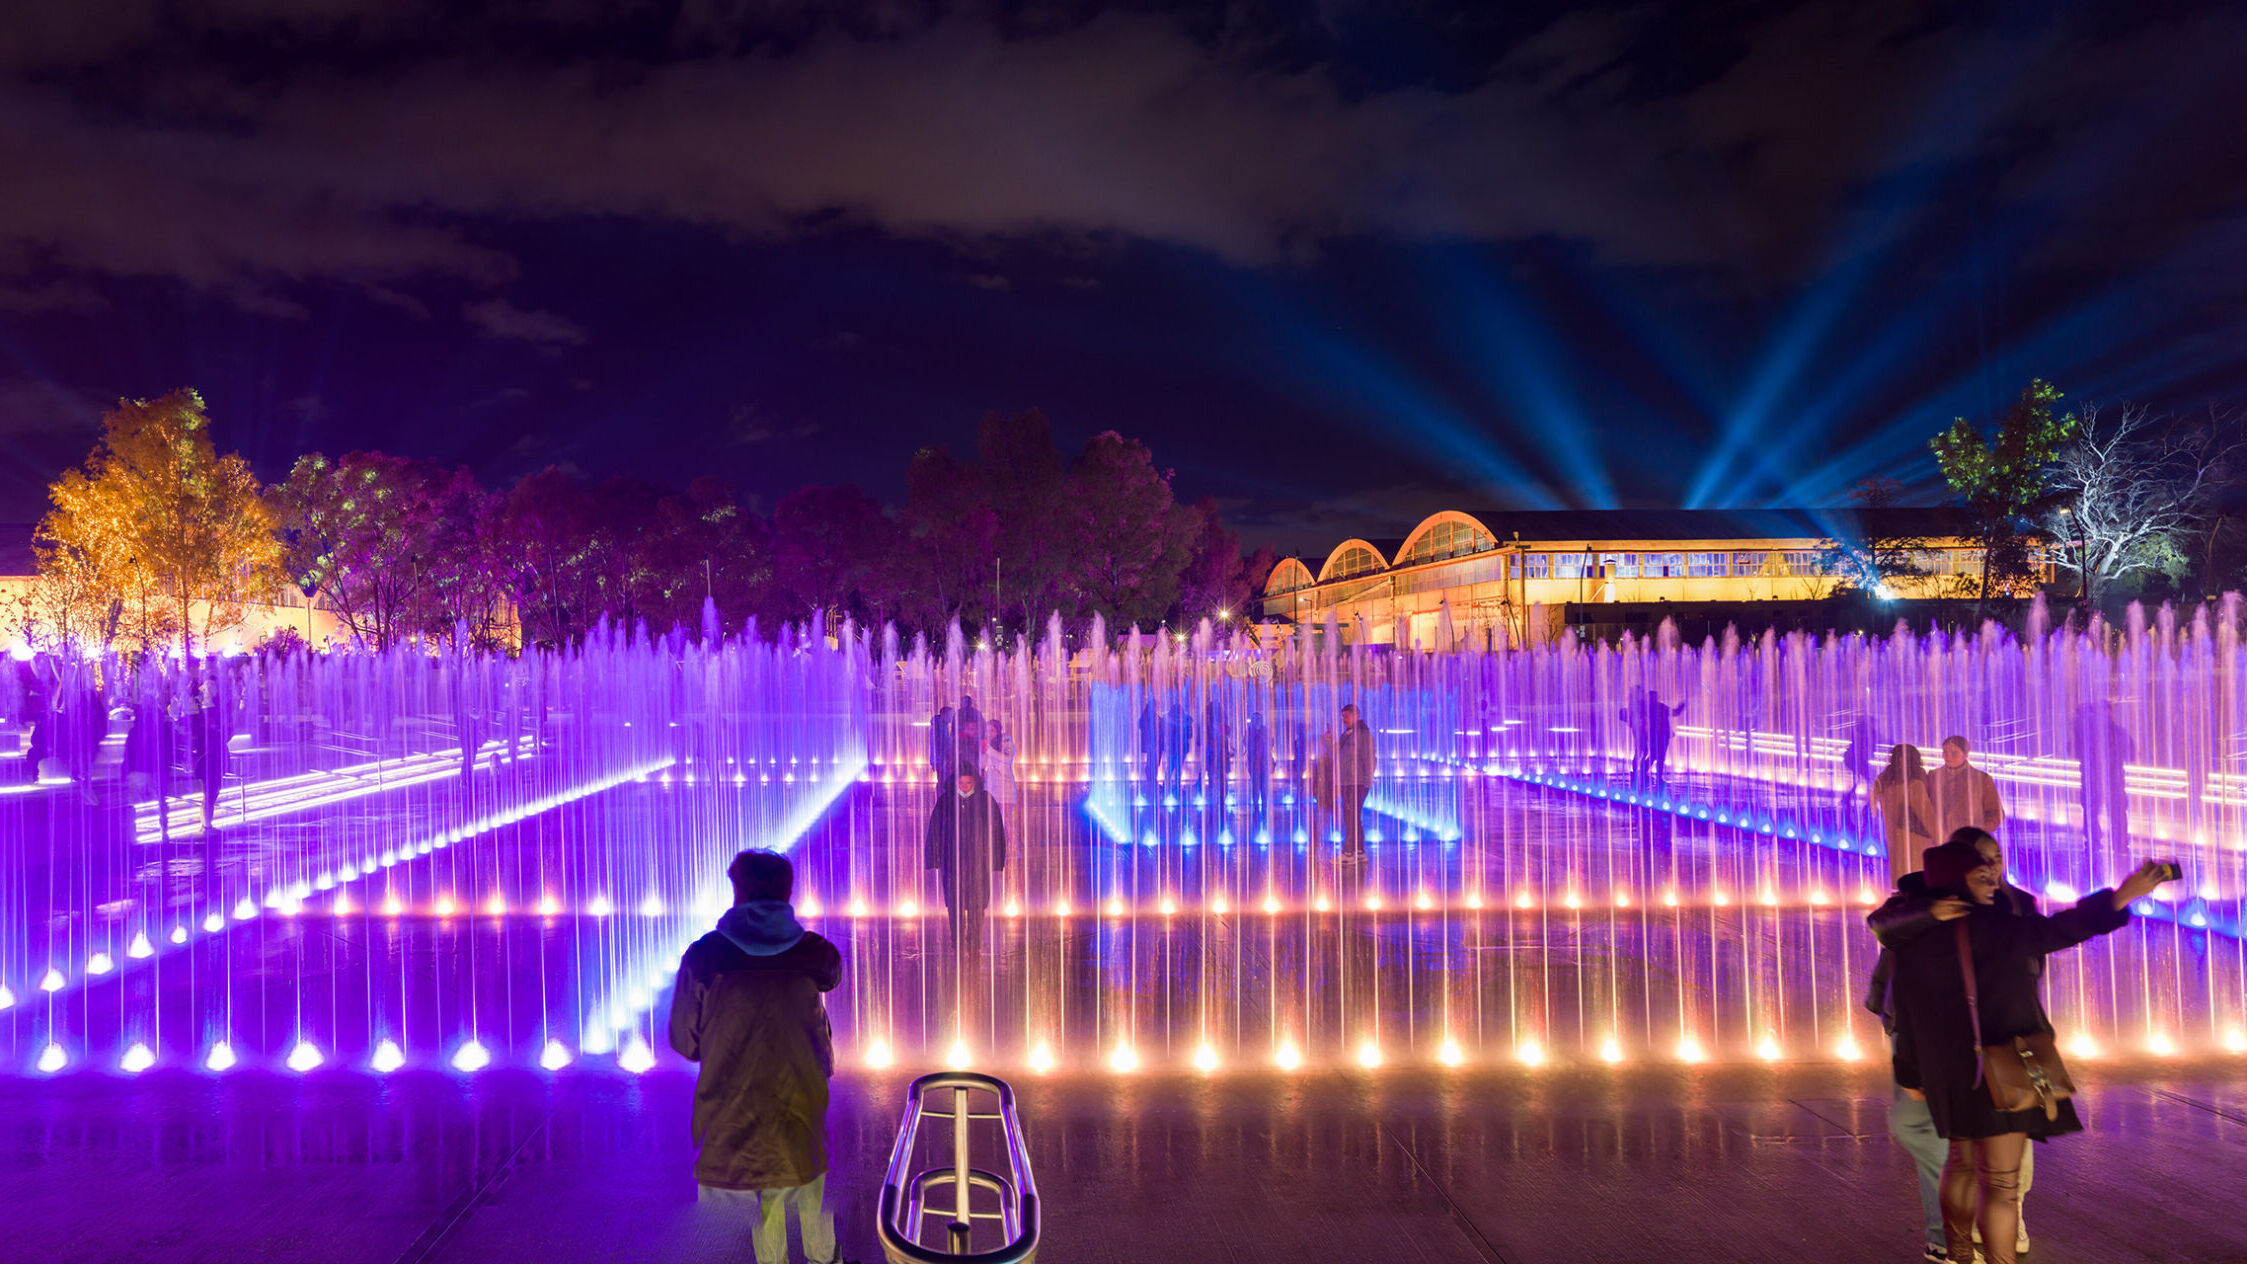 Greece: Artist's image of the water labyrinth at The Ellinikon Experience Park in Athens, Greece